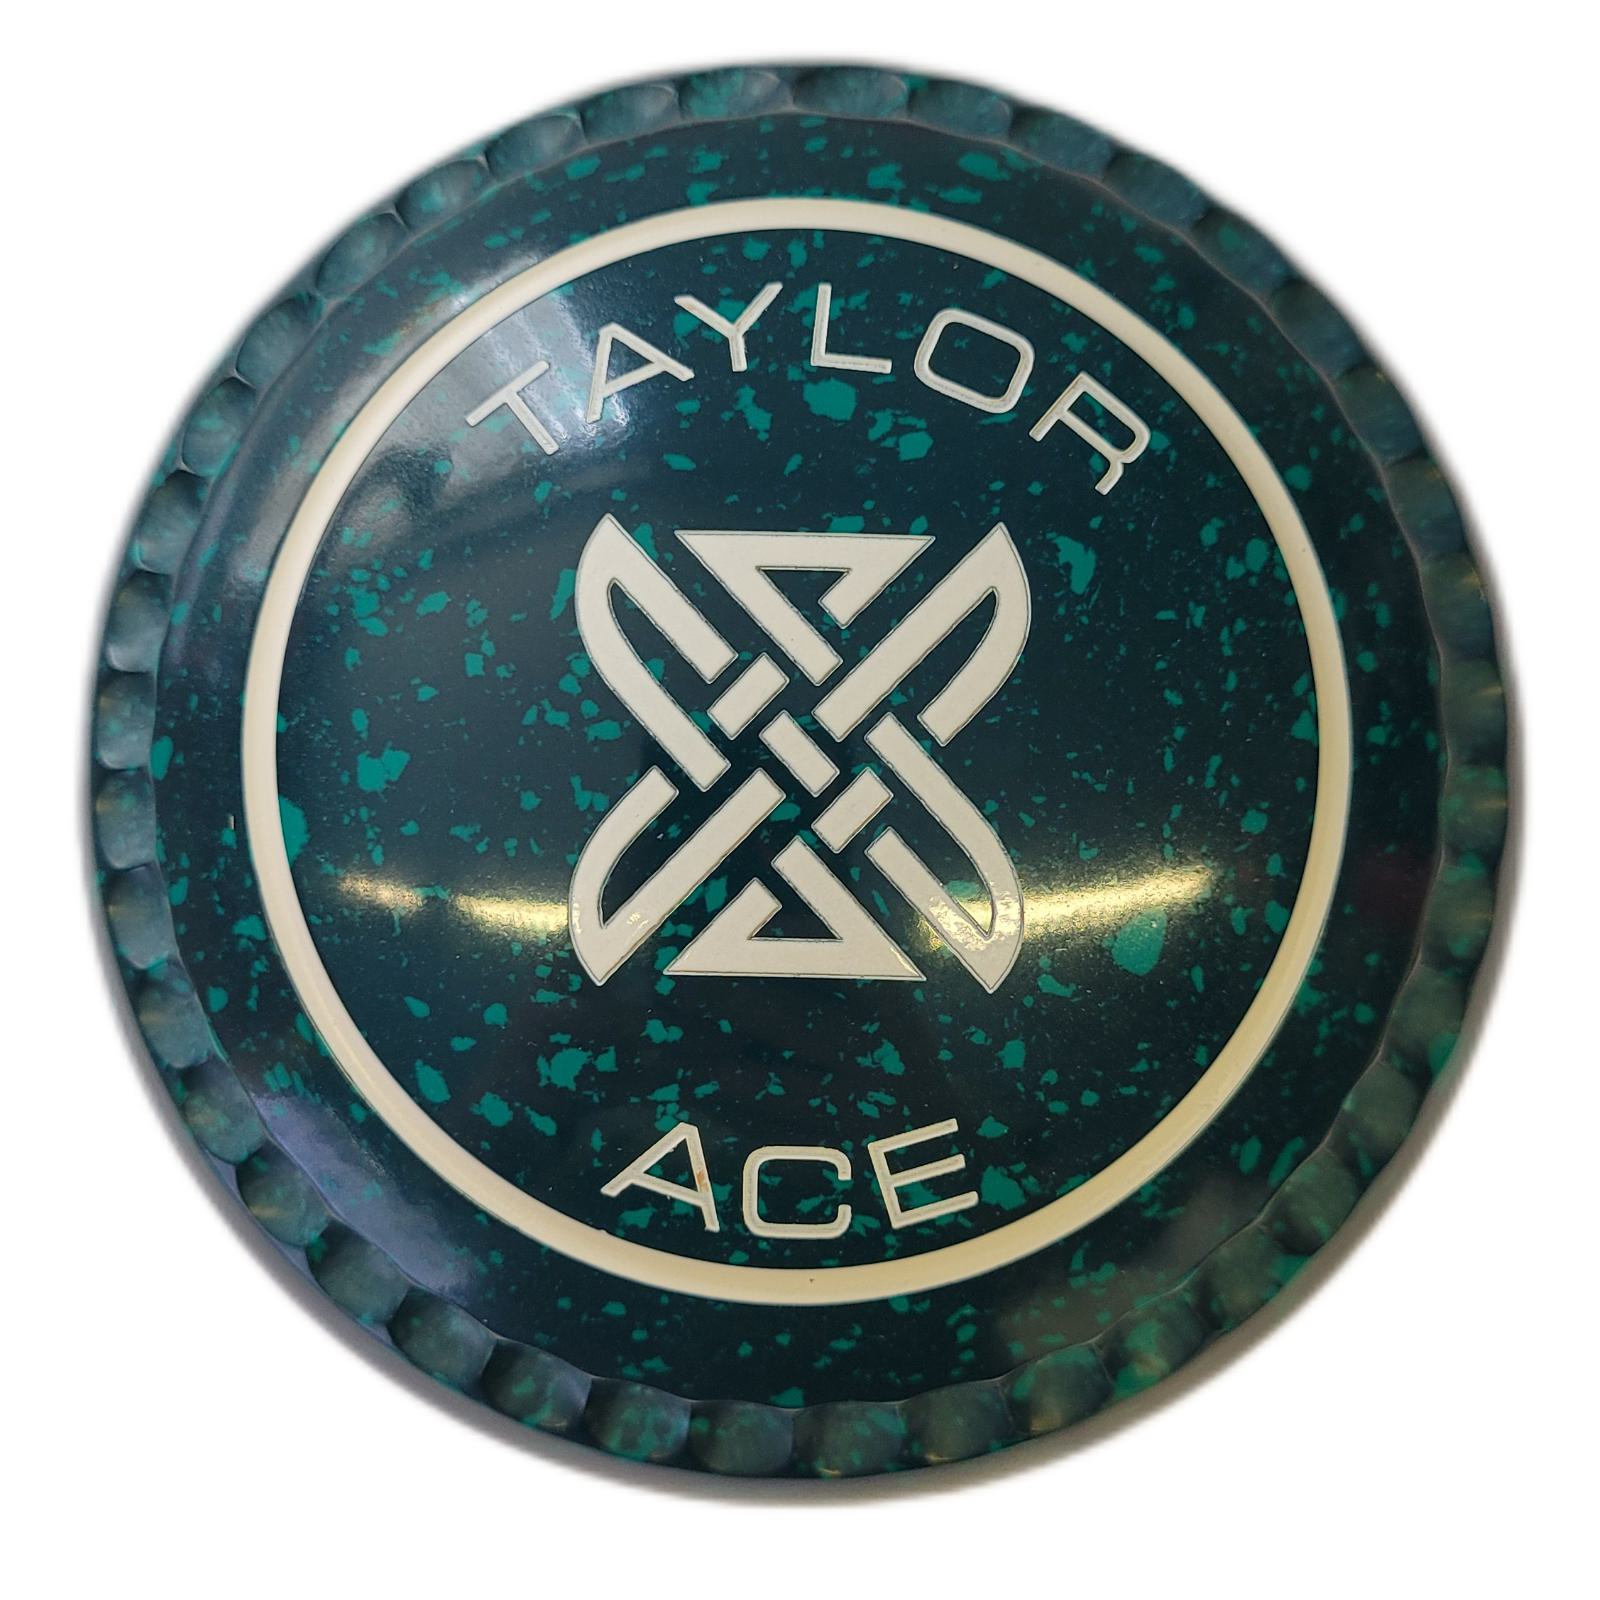 Taylor  Ace size 3H Green/GreenXtreme grip